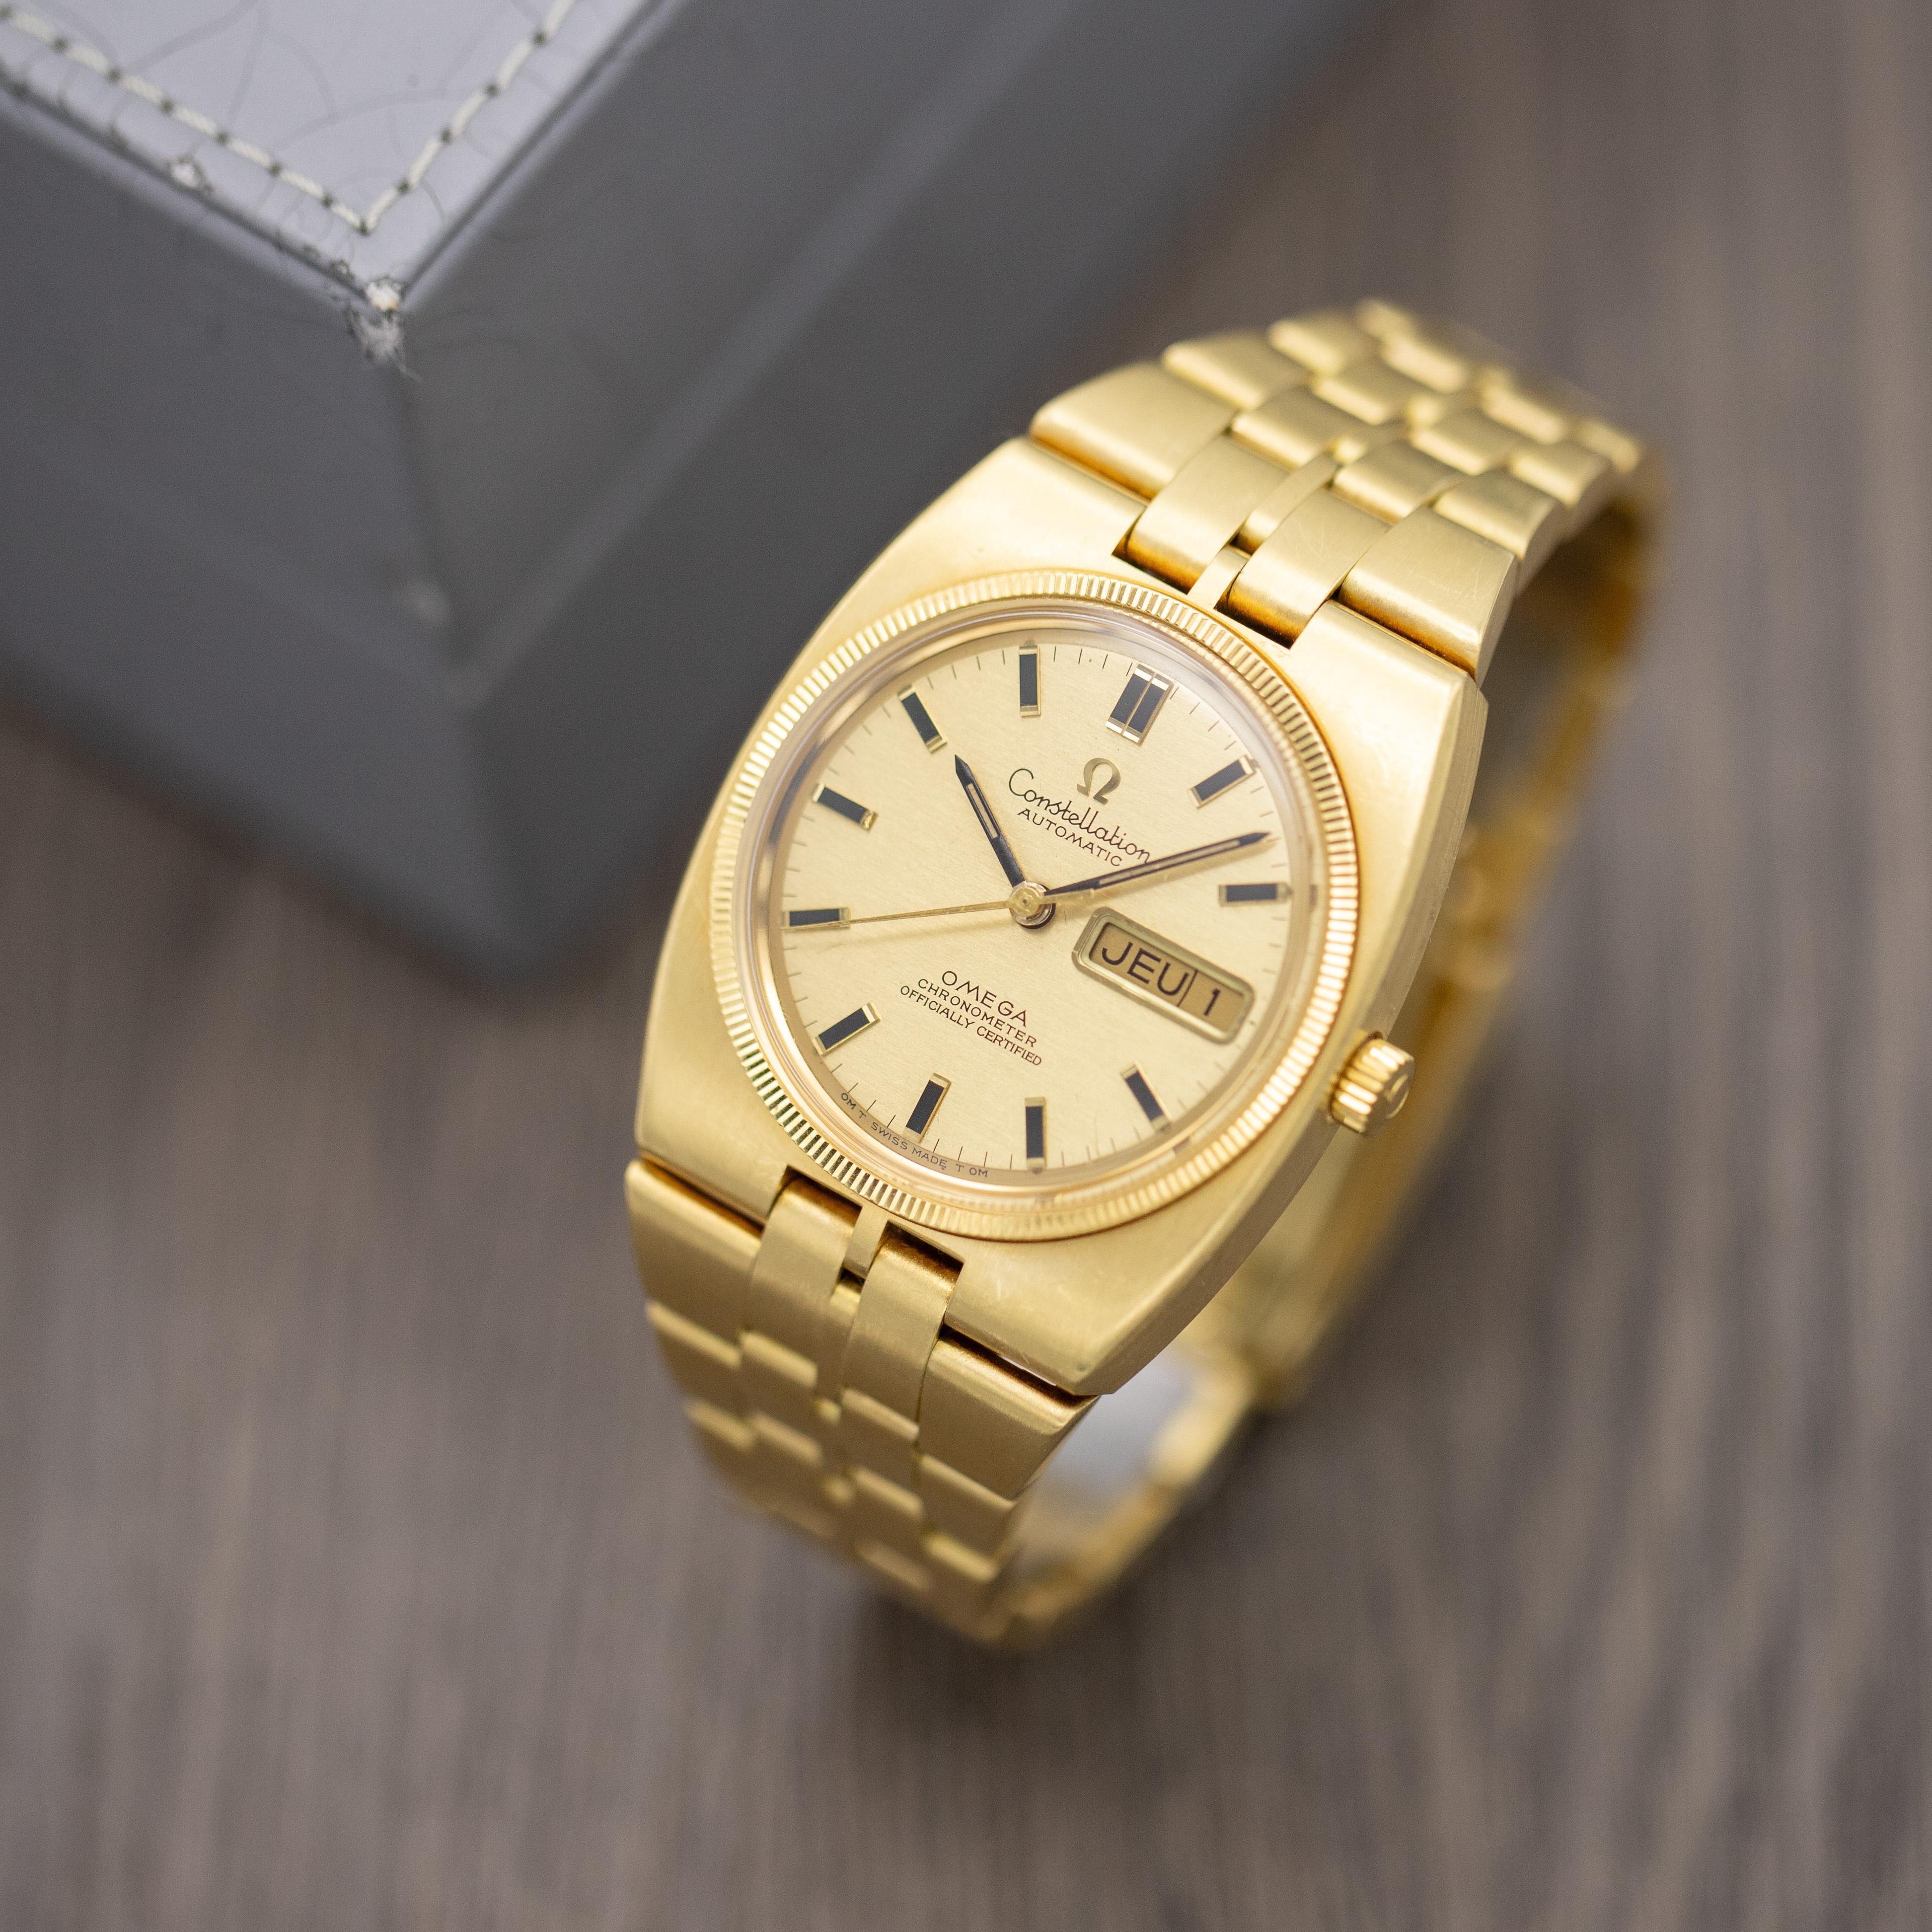 Modern Omega Constellation Automatic Chronometer Day-Date - Vintage 18k Men's Watch